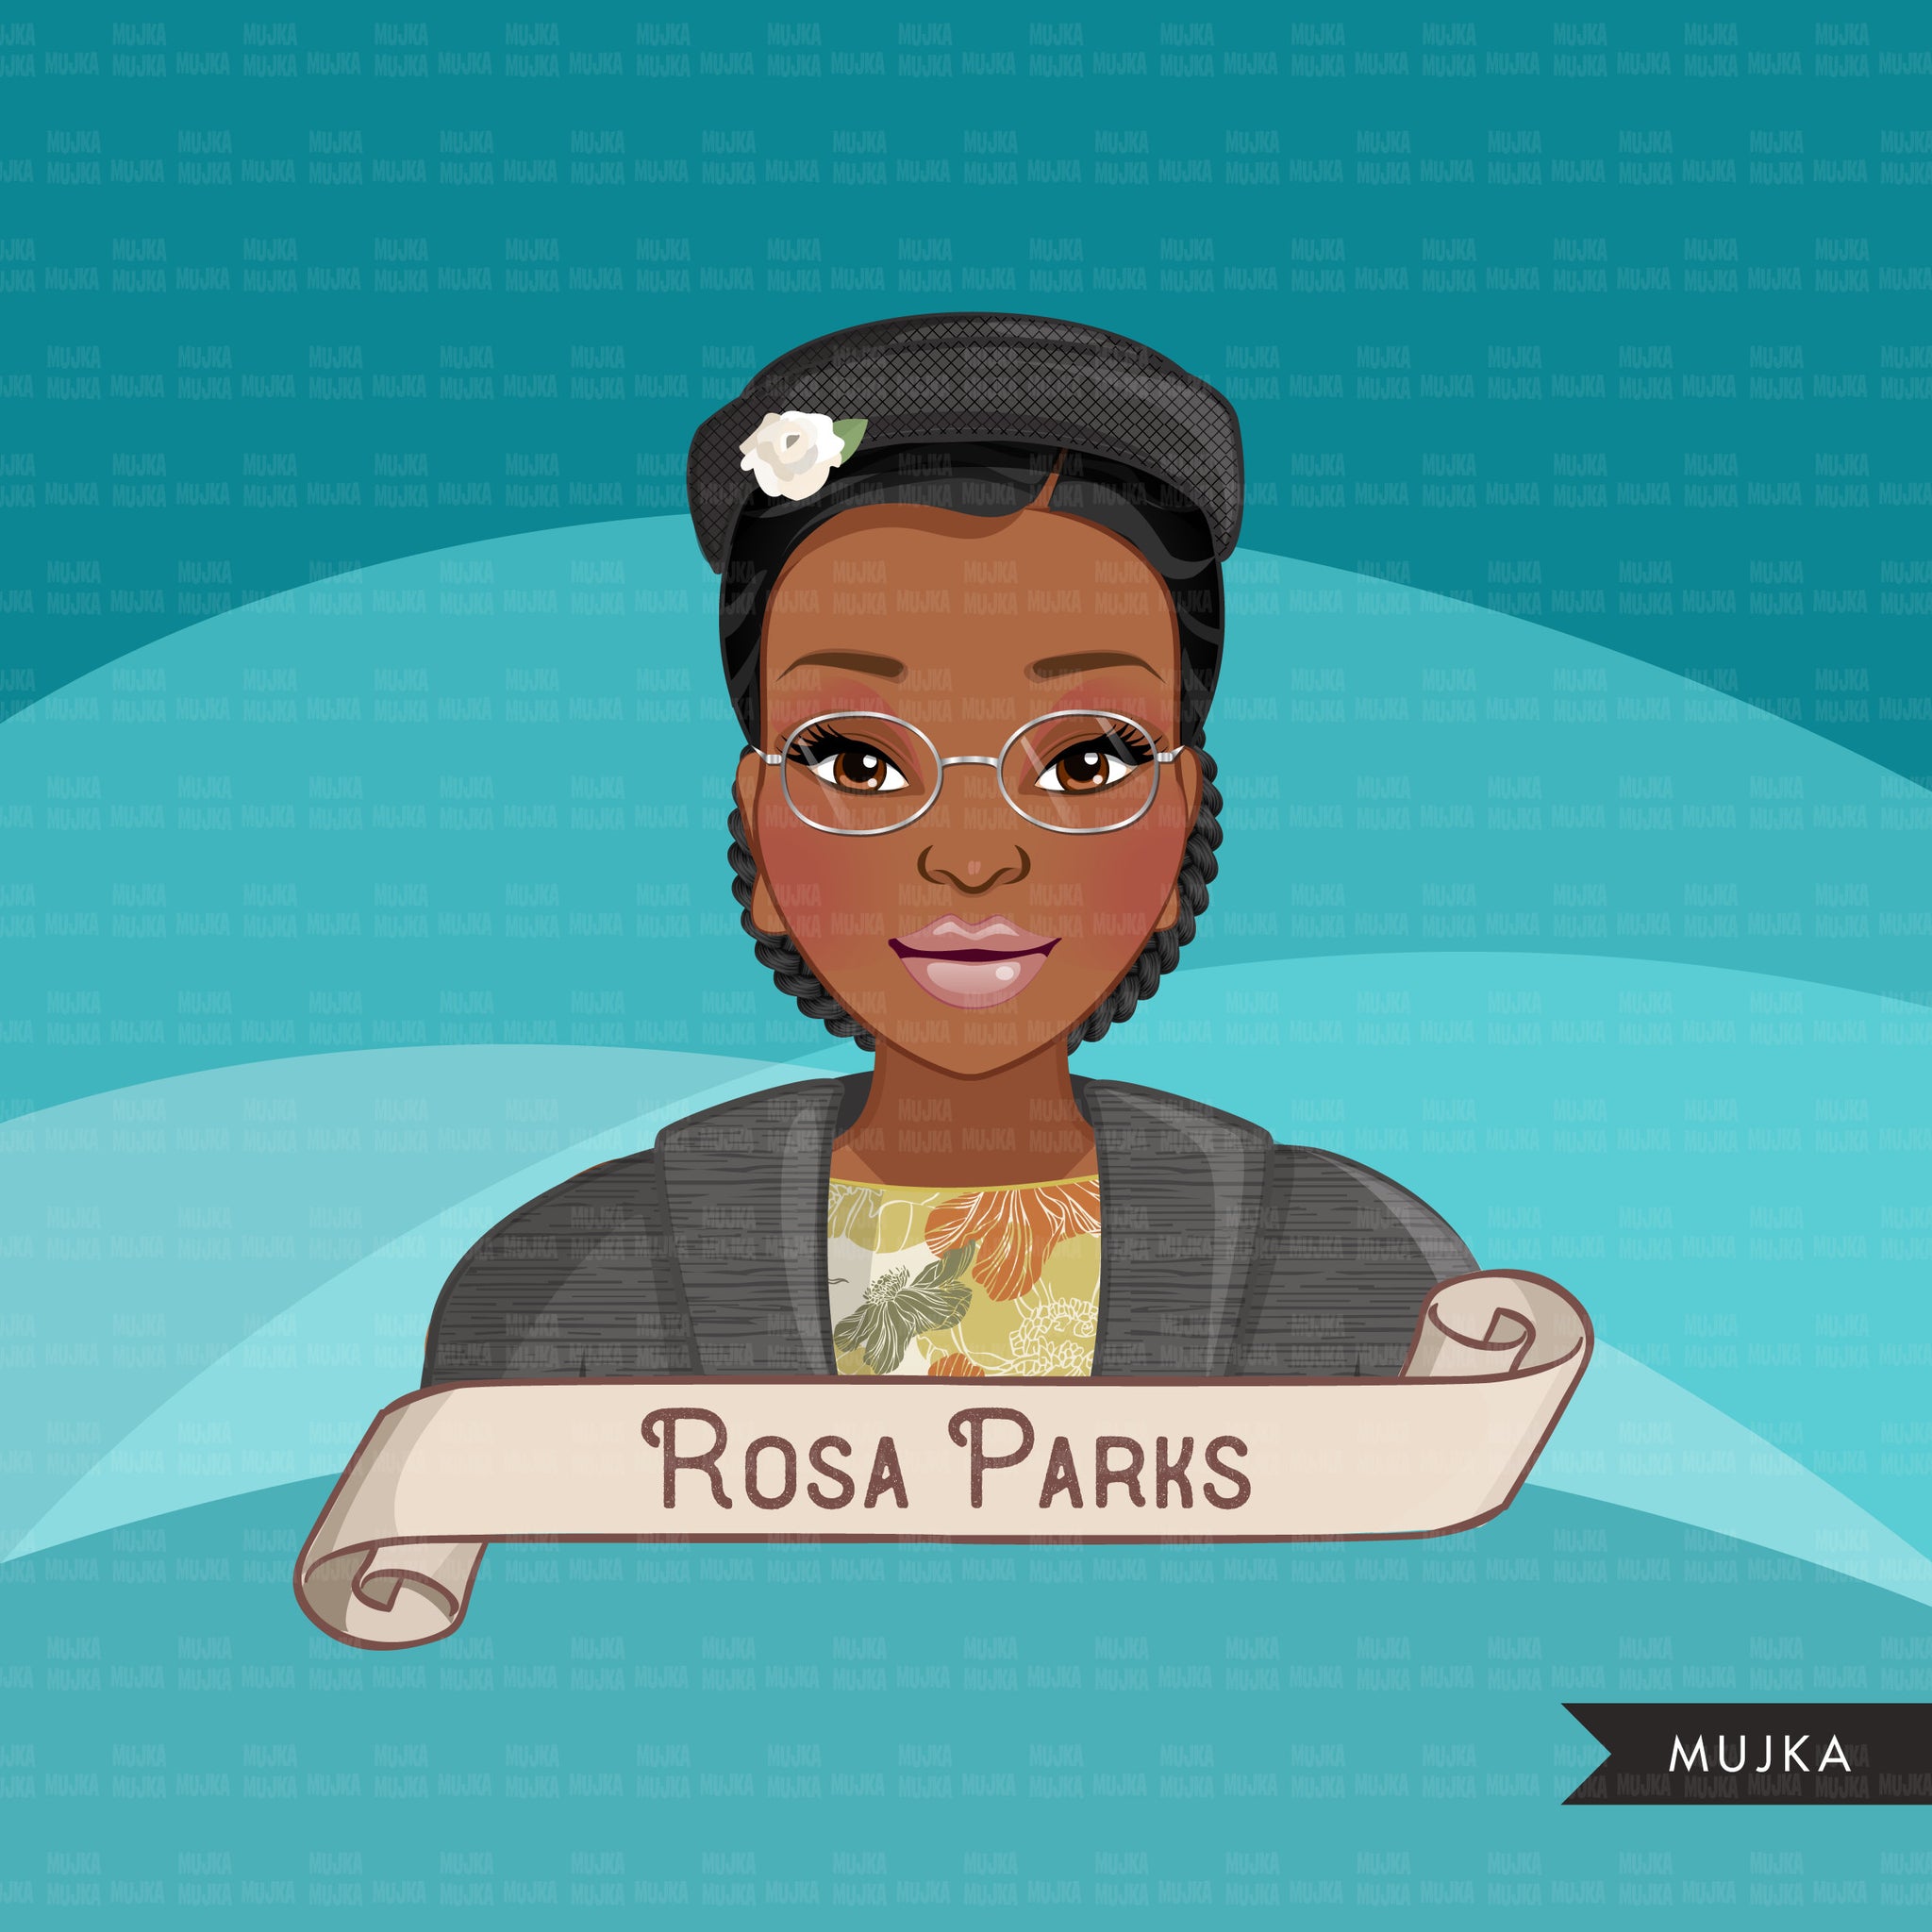 Black history Clipart, Black woman, Social justice figures, Rosa Parks, Harriet Tubman, Maya Angelou, history graphics, commercial use PNG